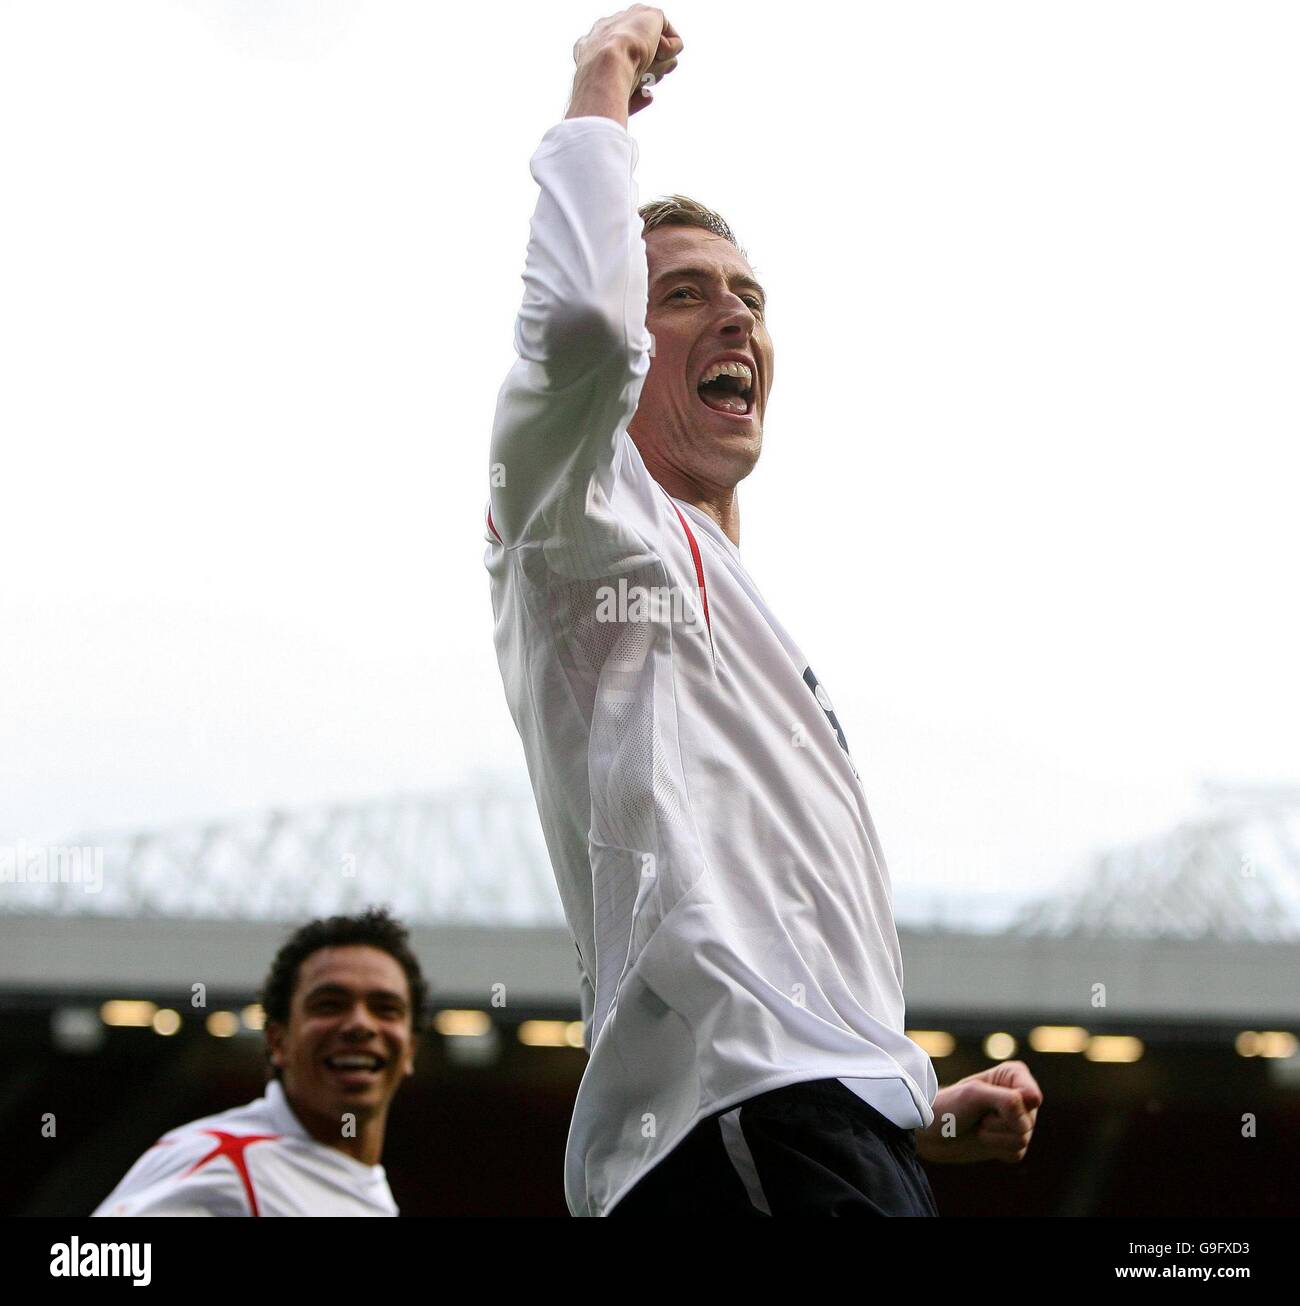 England's Peter Crouch celebrates his second goal during the European Championship qualifying match against Andorra at Old Trafford, Manchester. Stock Photo